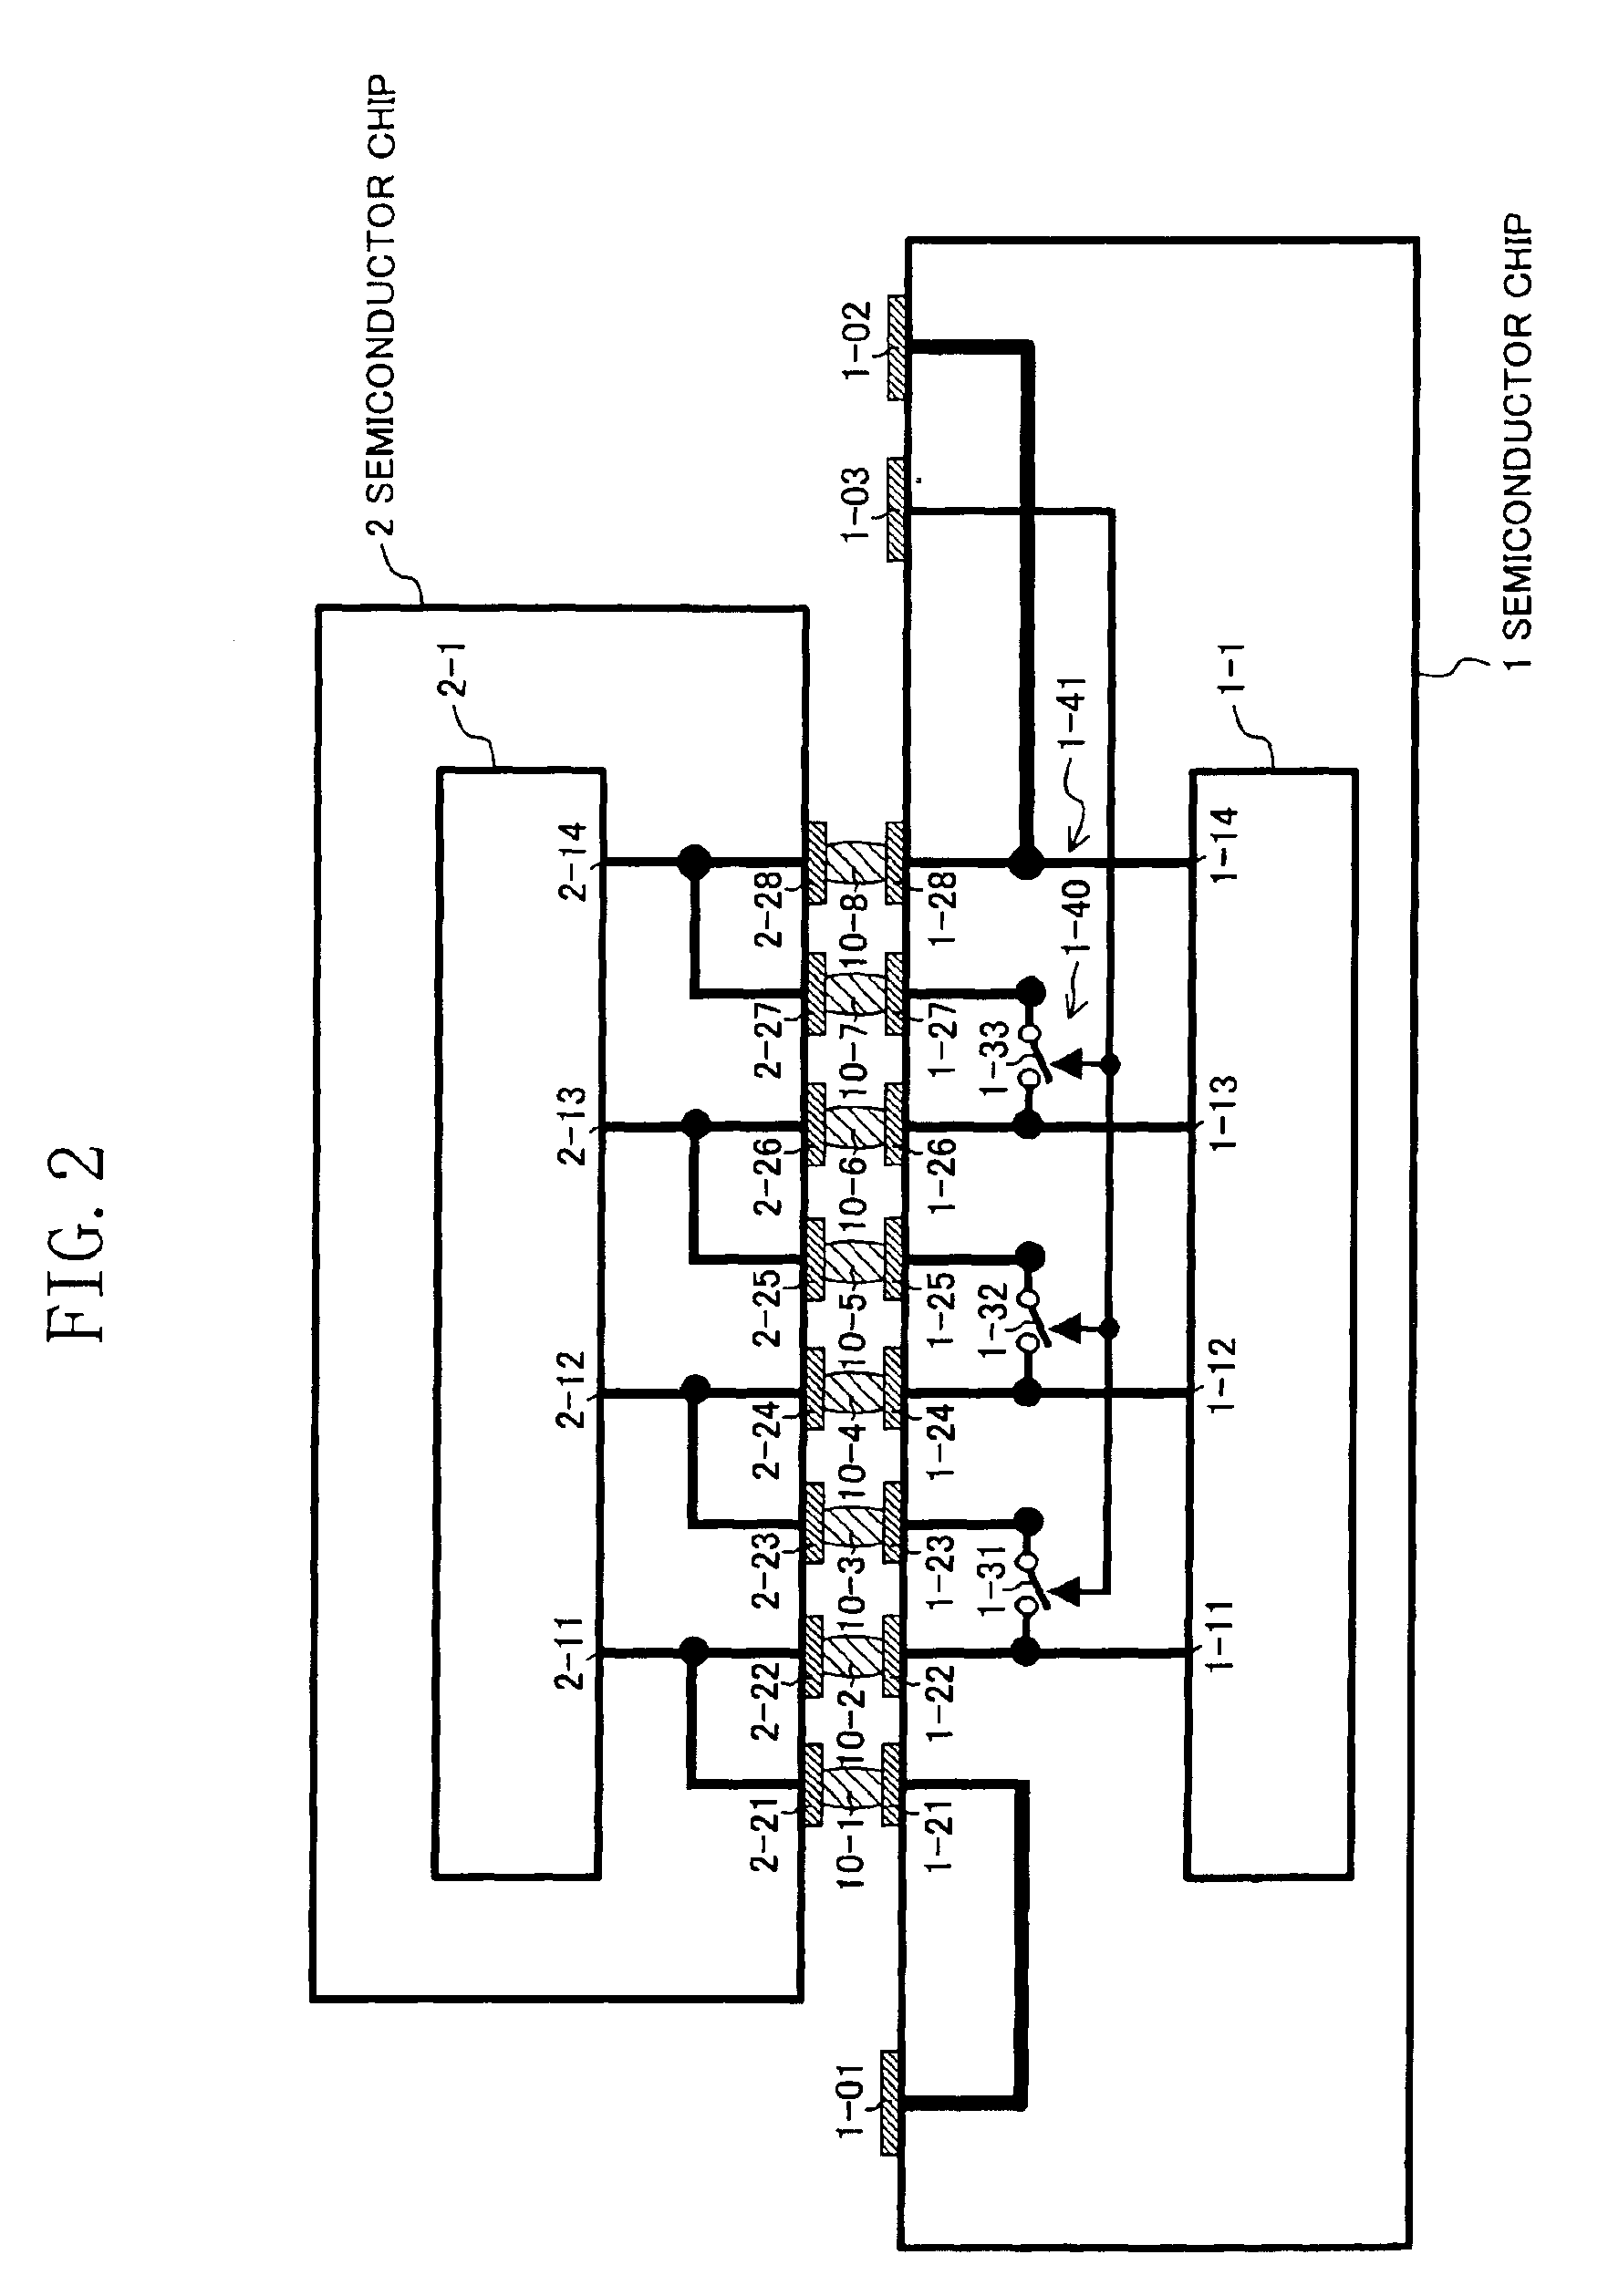 Multi-chip module, semiconductor chip, and interchip connection test method for multi-chip module